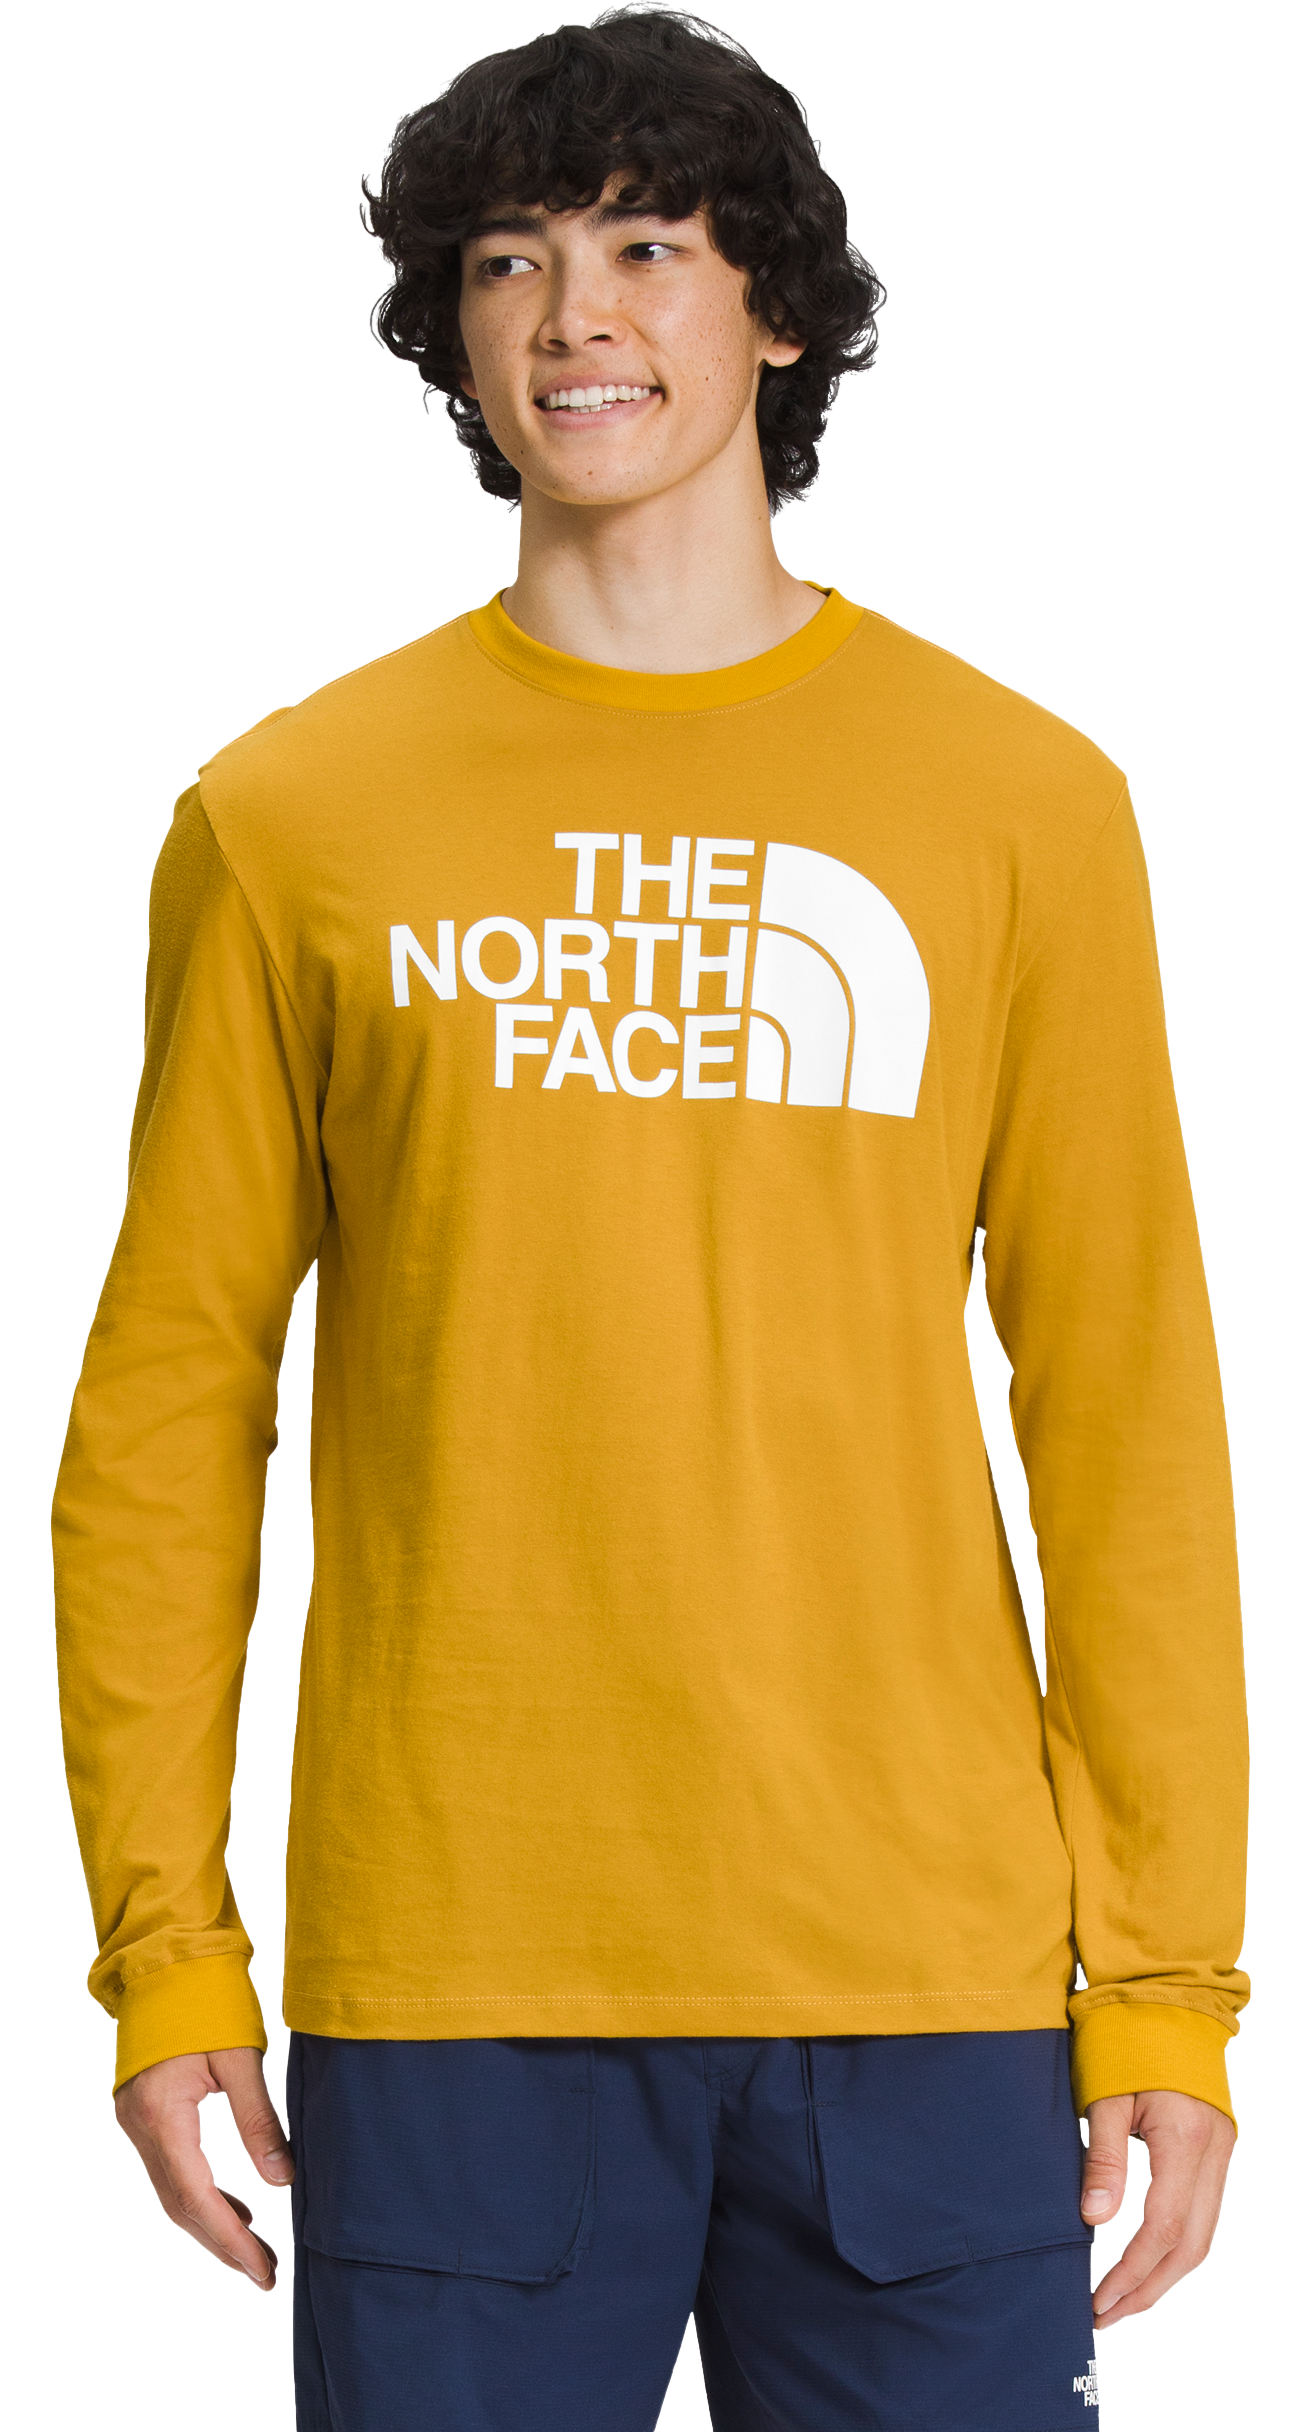 The North Face Half Dome Long-Sleeve T-Shirt for Men